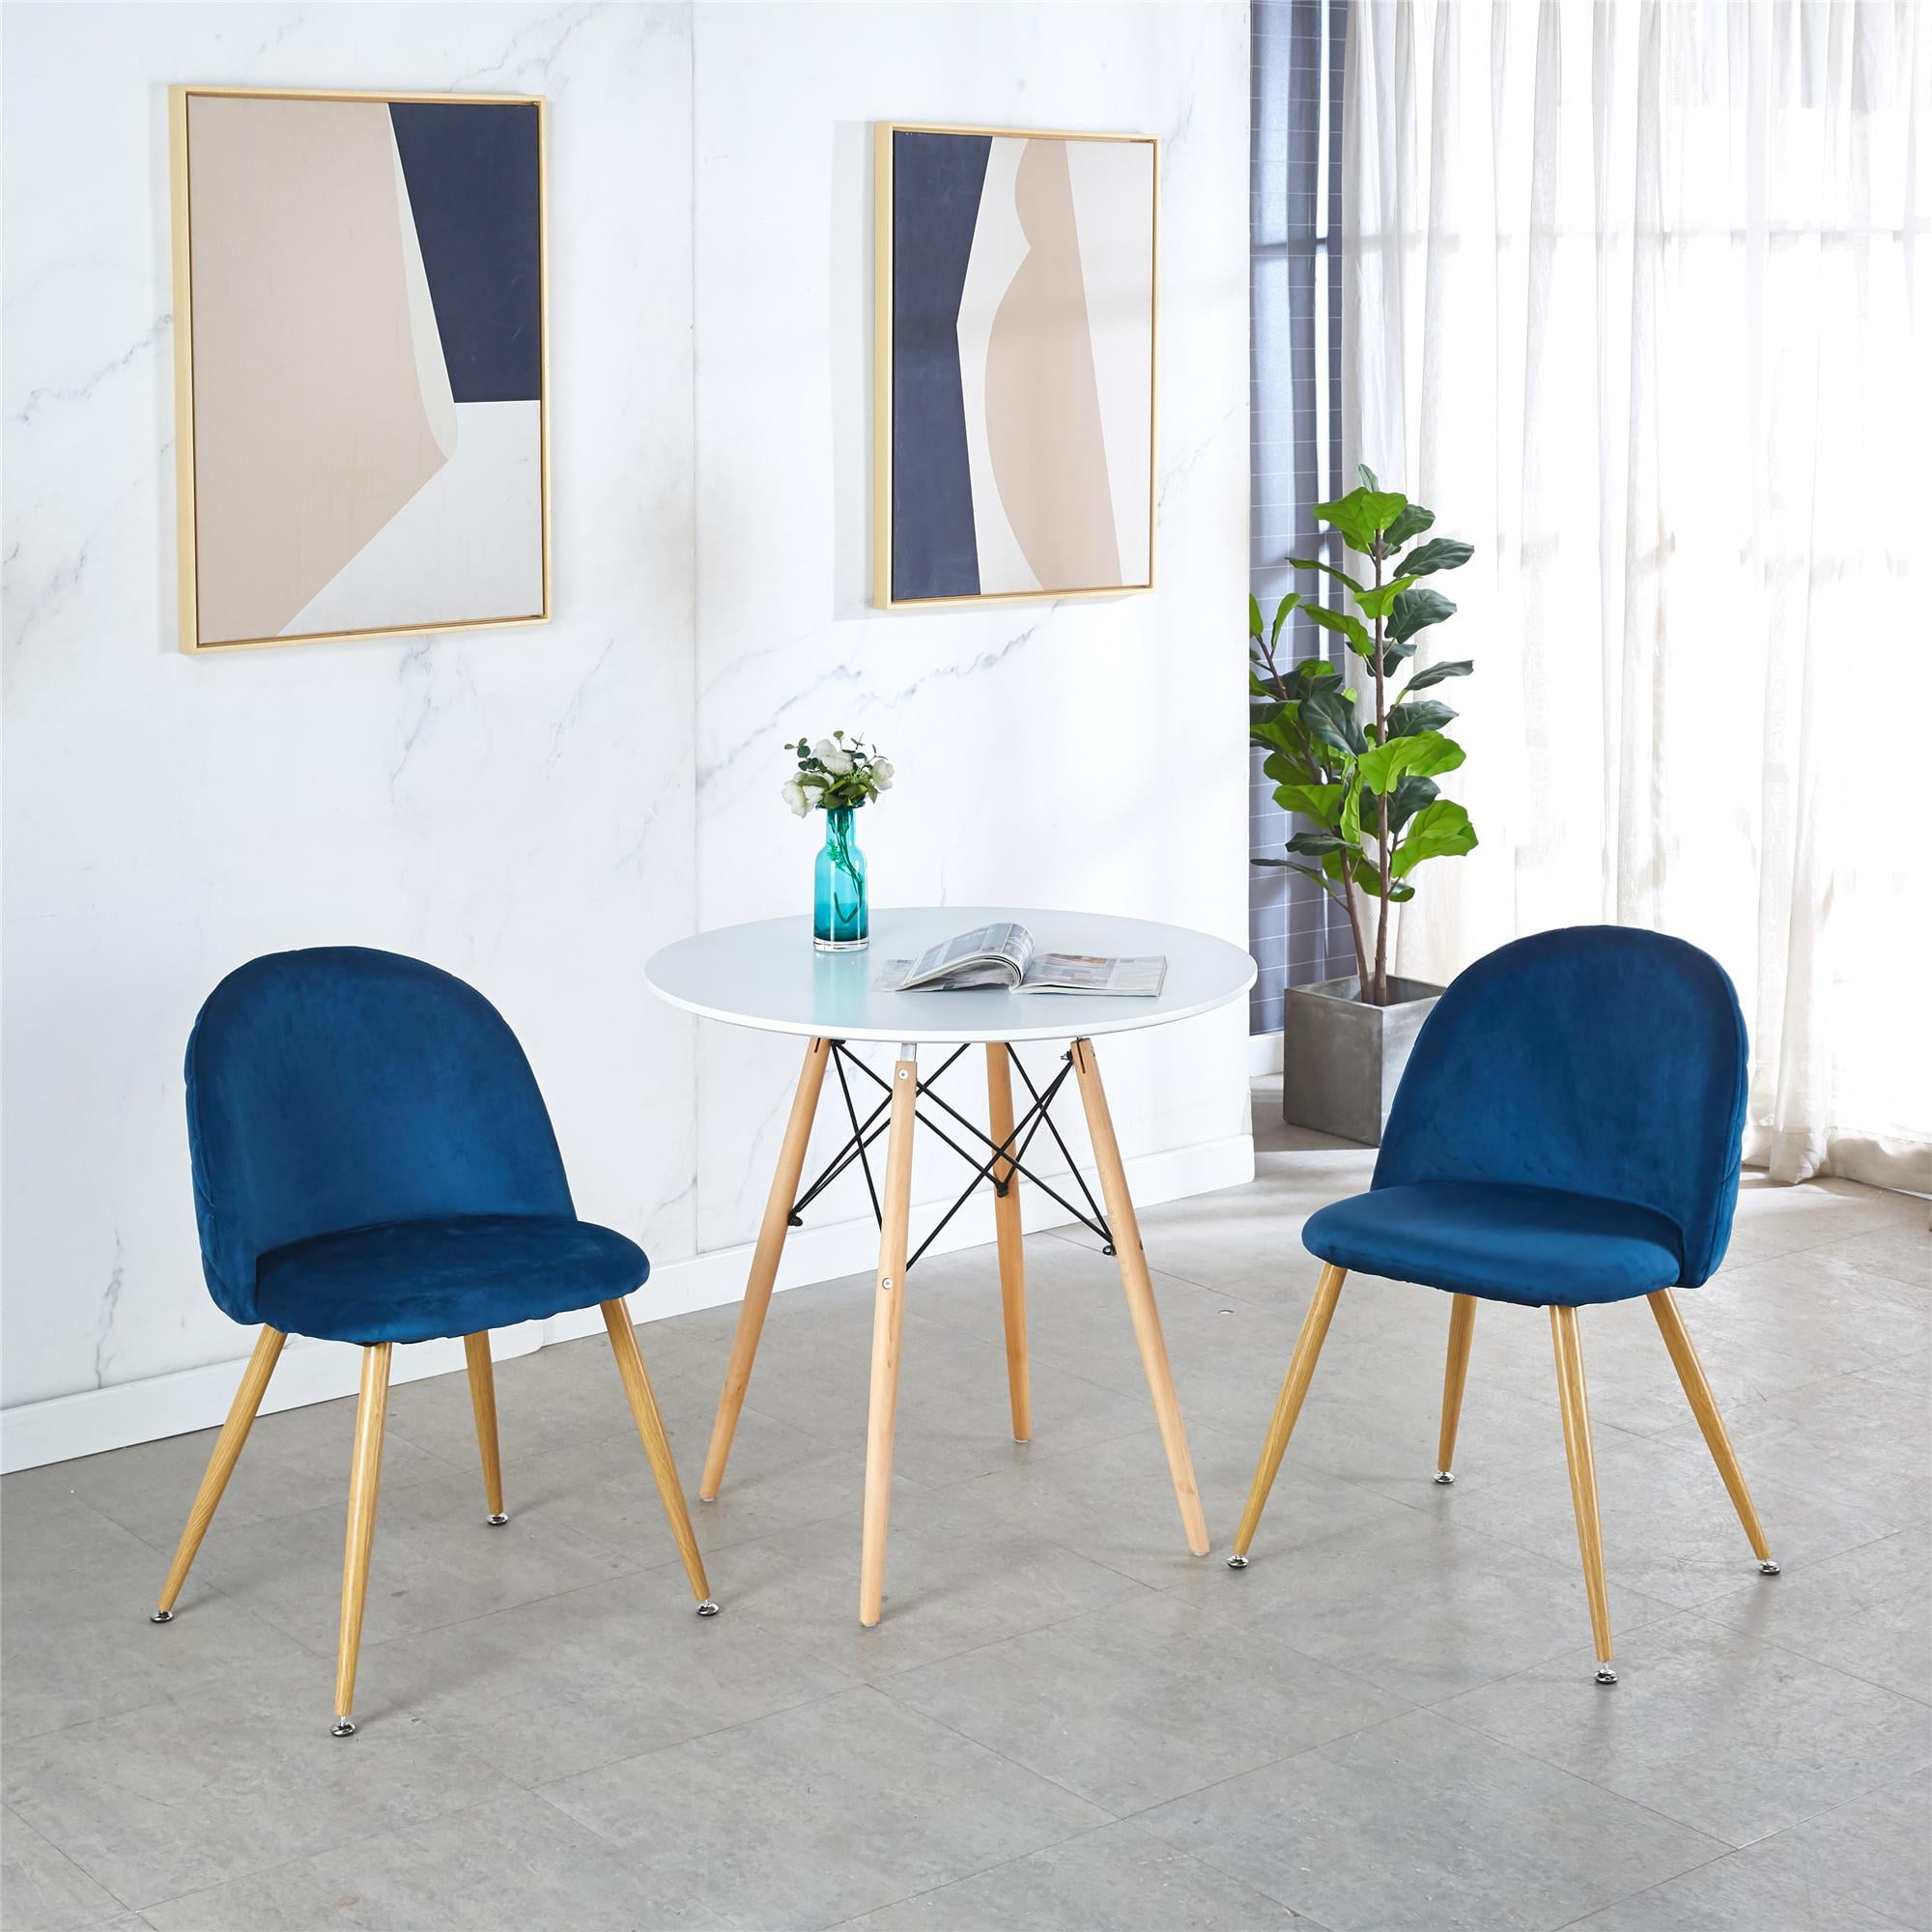 2, Blue1 Dining Chairs Set of 2 Mid Century Modern Velvet Kitchen Chairs Wood and Metal Legs Accent Side Chair for Living Room and Dinning Room